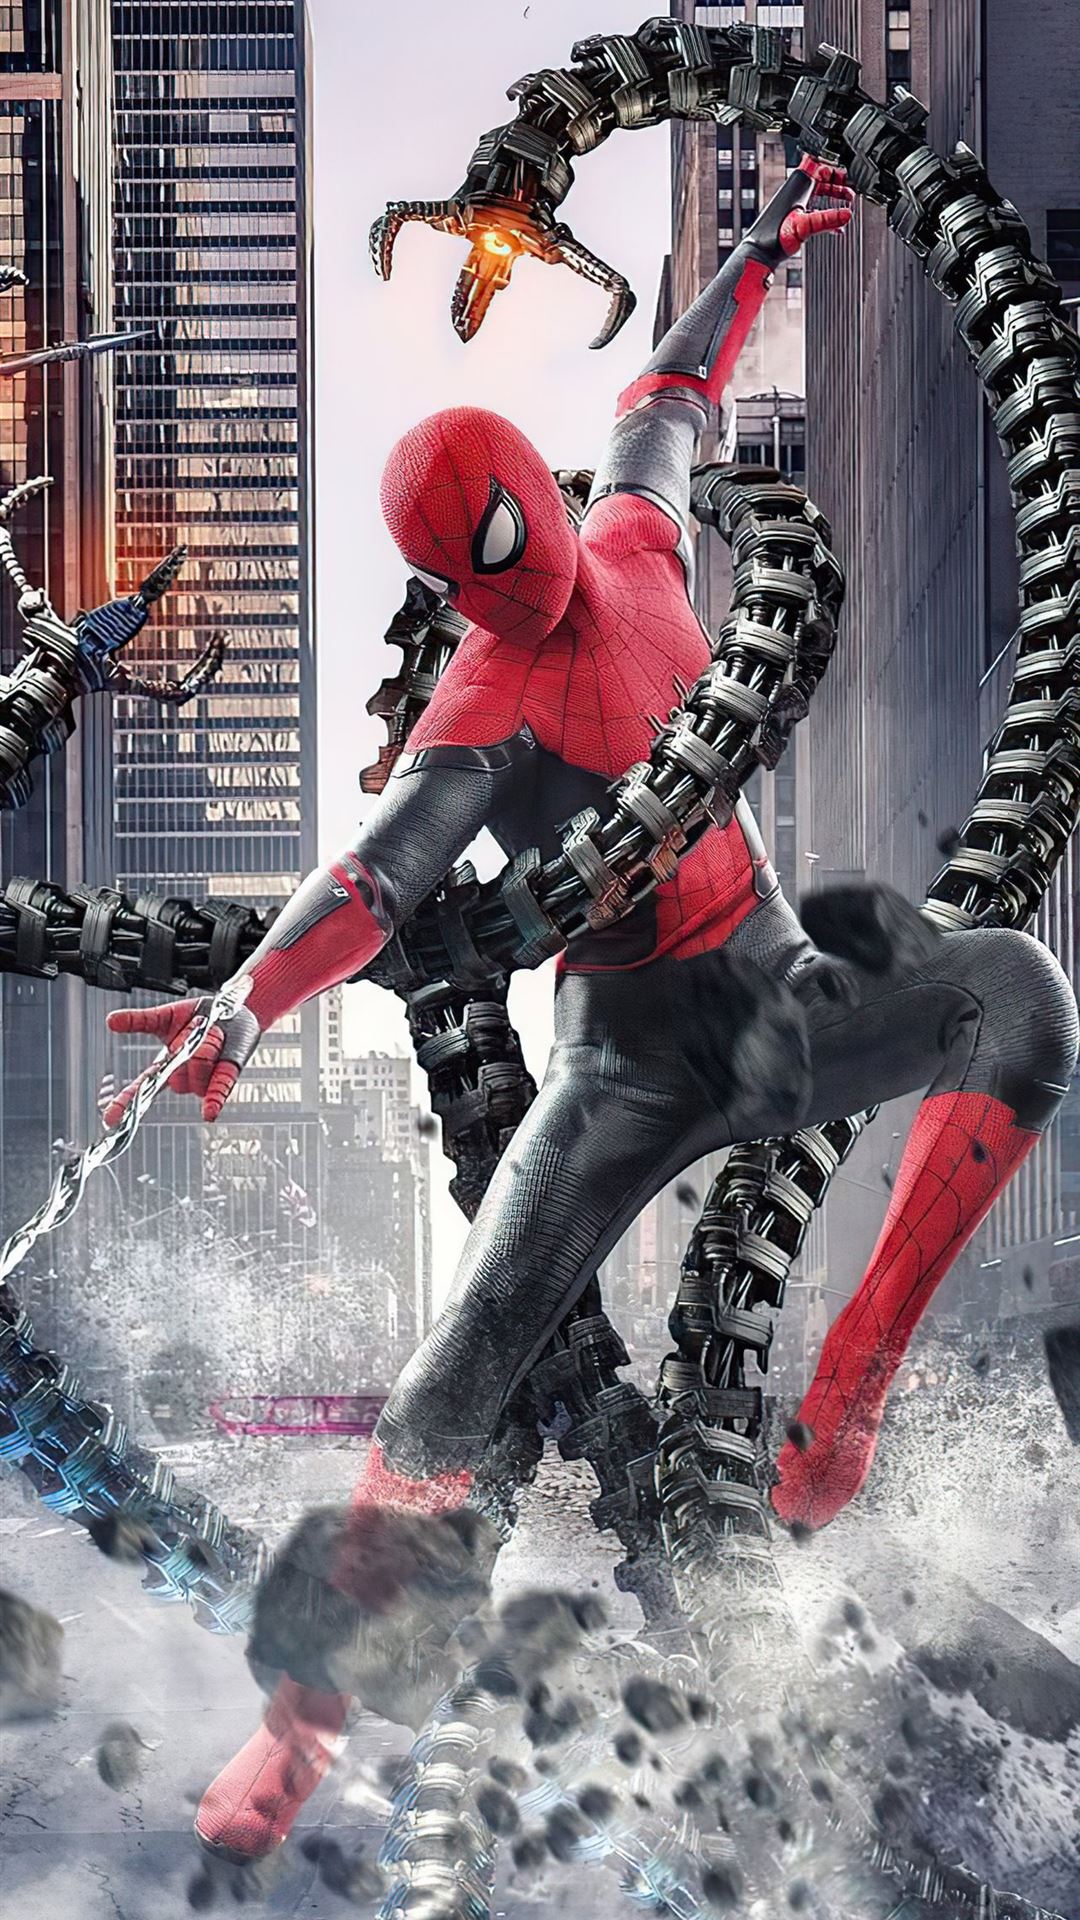 SPIDER MAN NO WAY HOME FULL MOVIE DOWNLOAD IN TAMIL